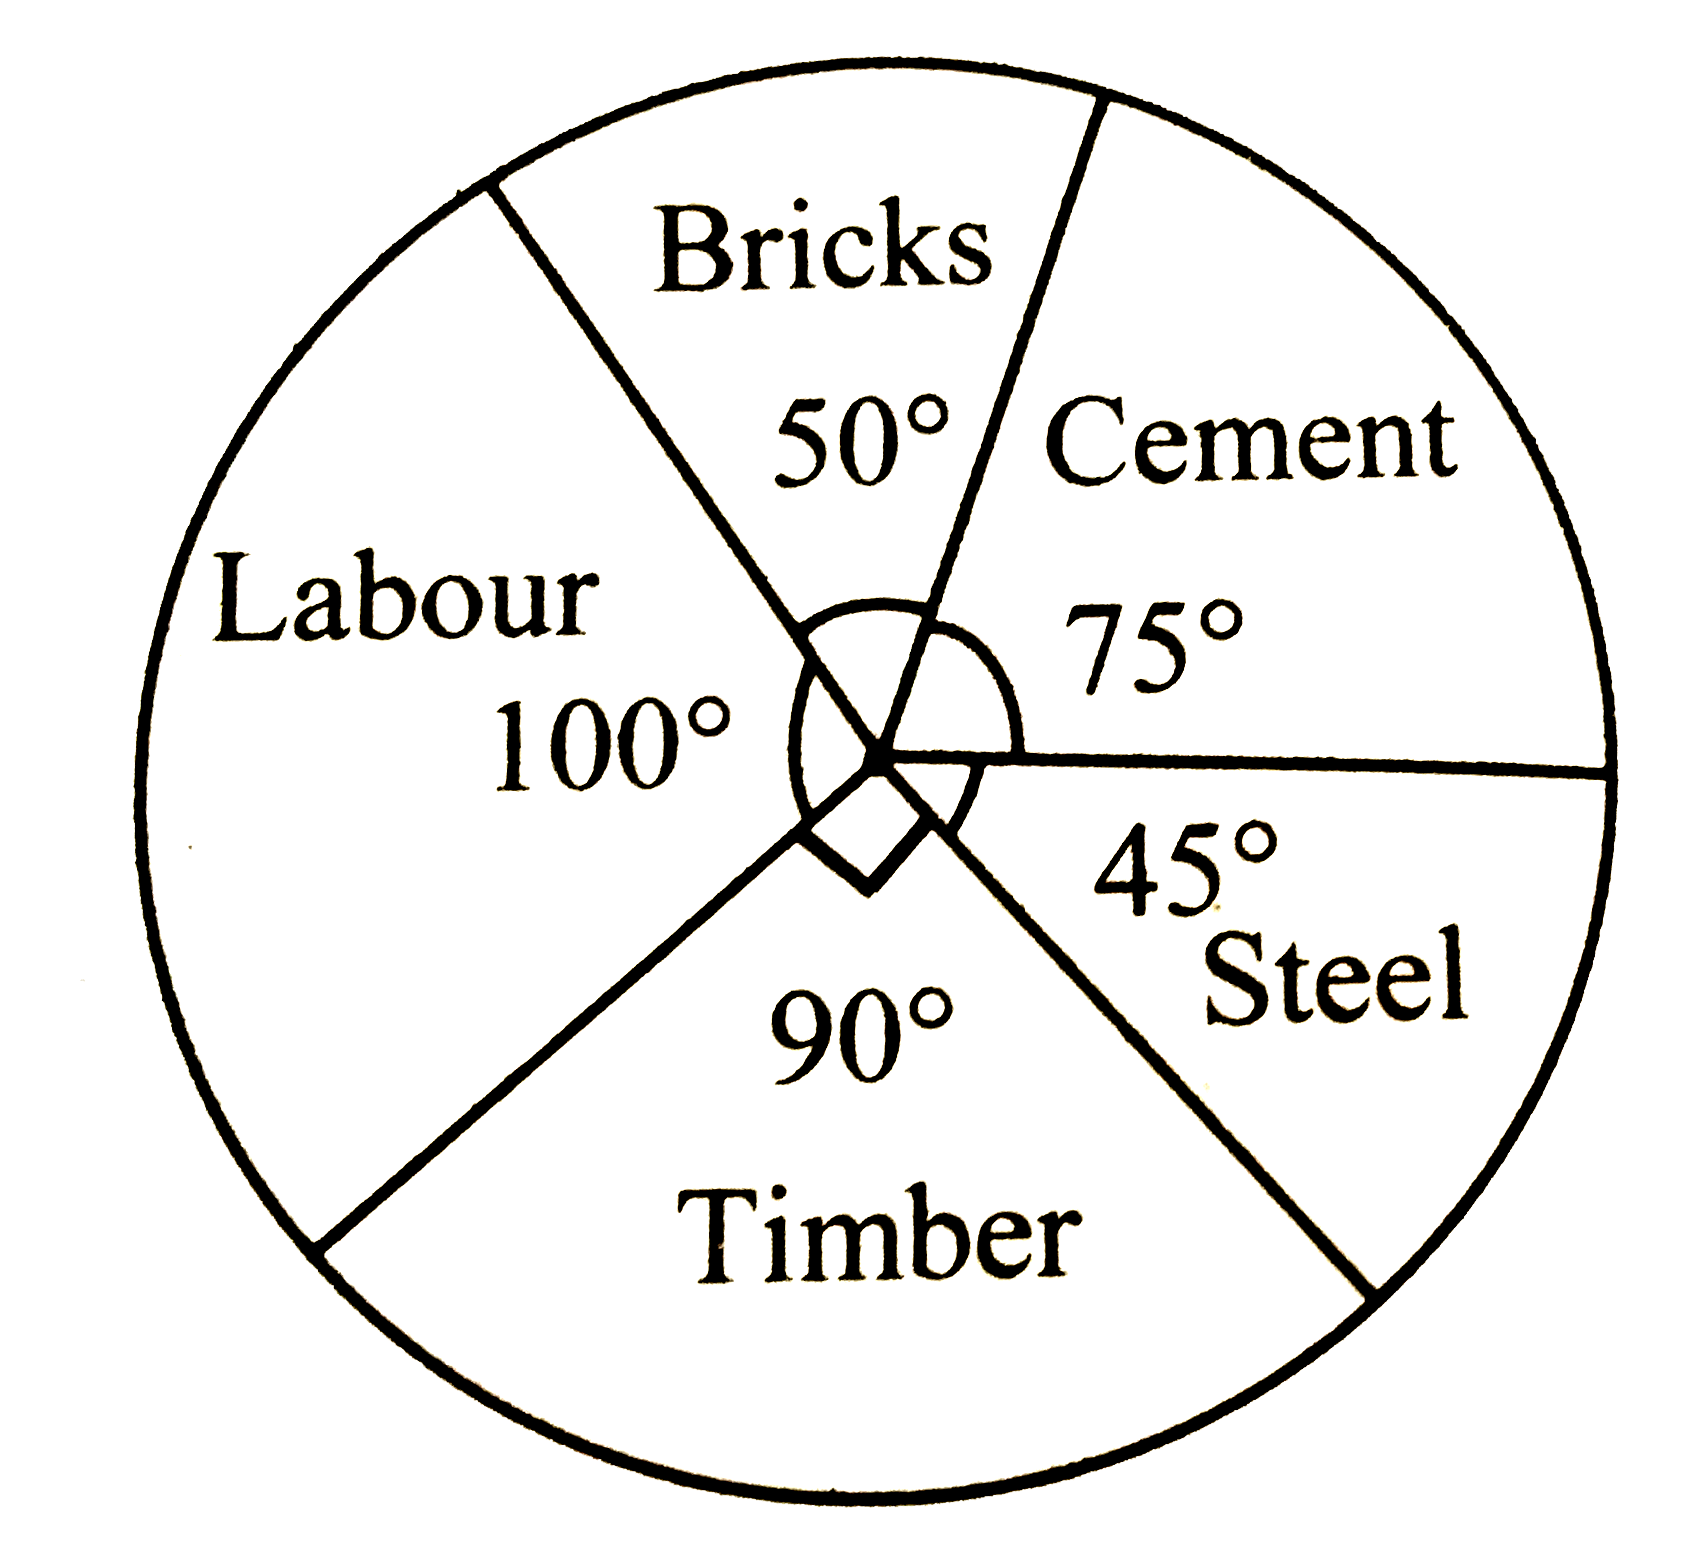 The adjacent pie diagram represents expenditure on different items in constructing a building. If the expenditure on bricks is Rs75000, find the total expenditure and expenditure on labour.